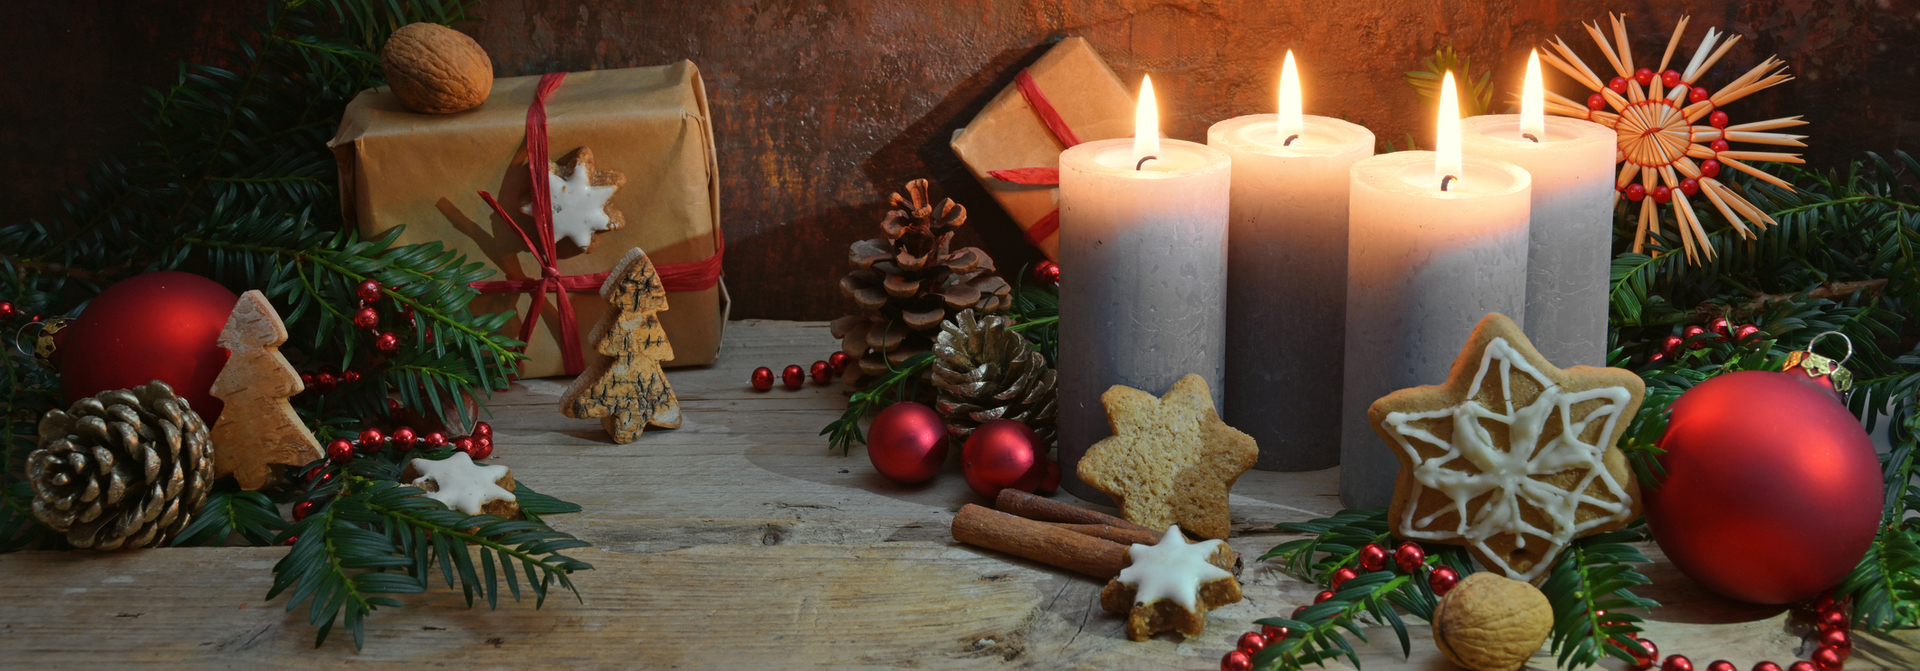 A christmas themed image with candles